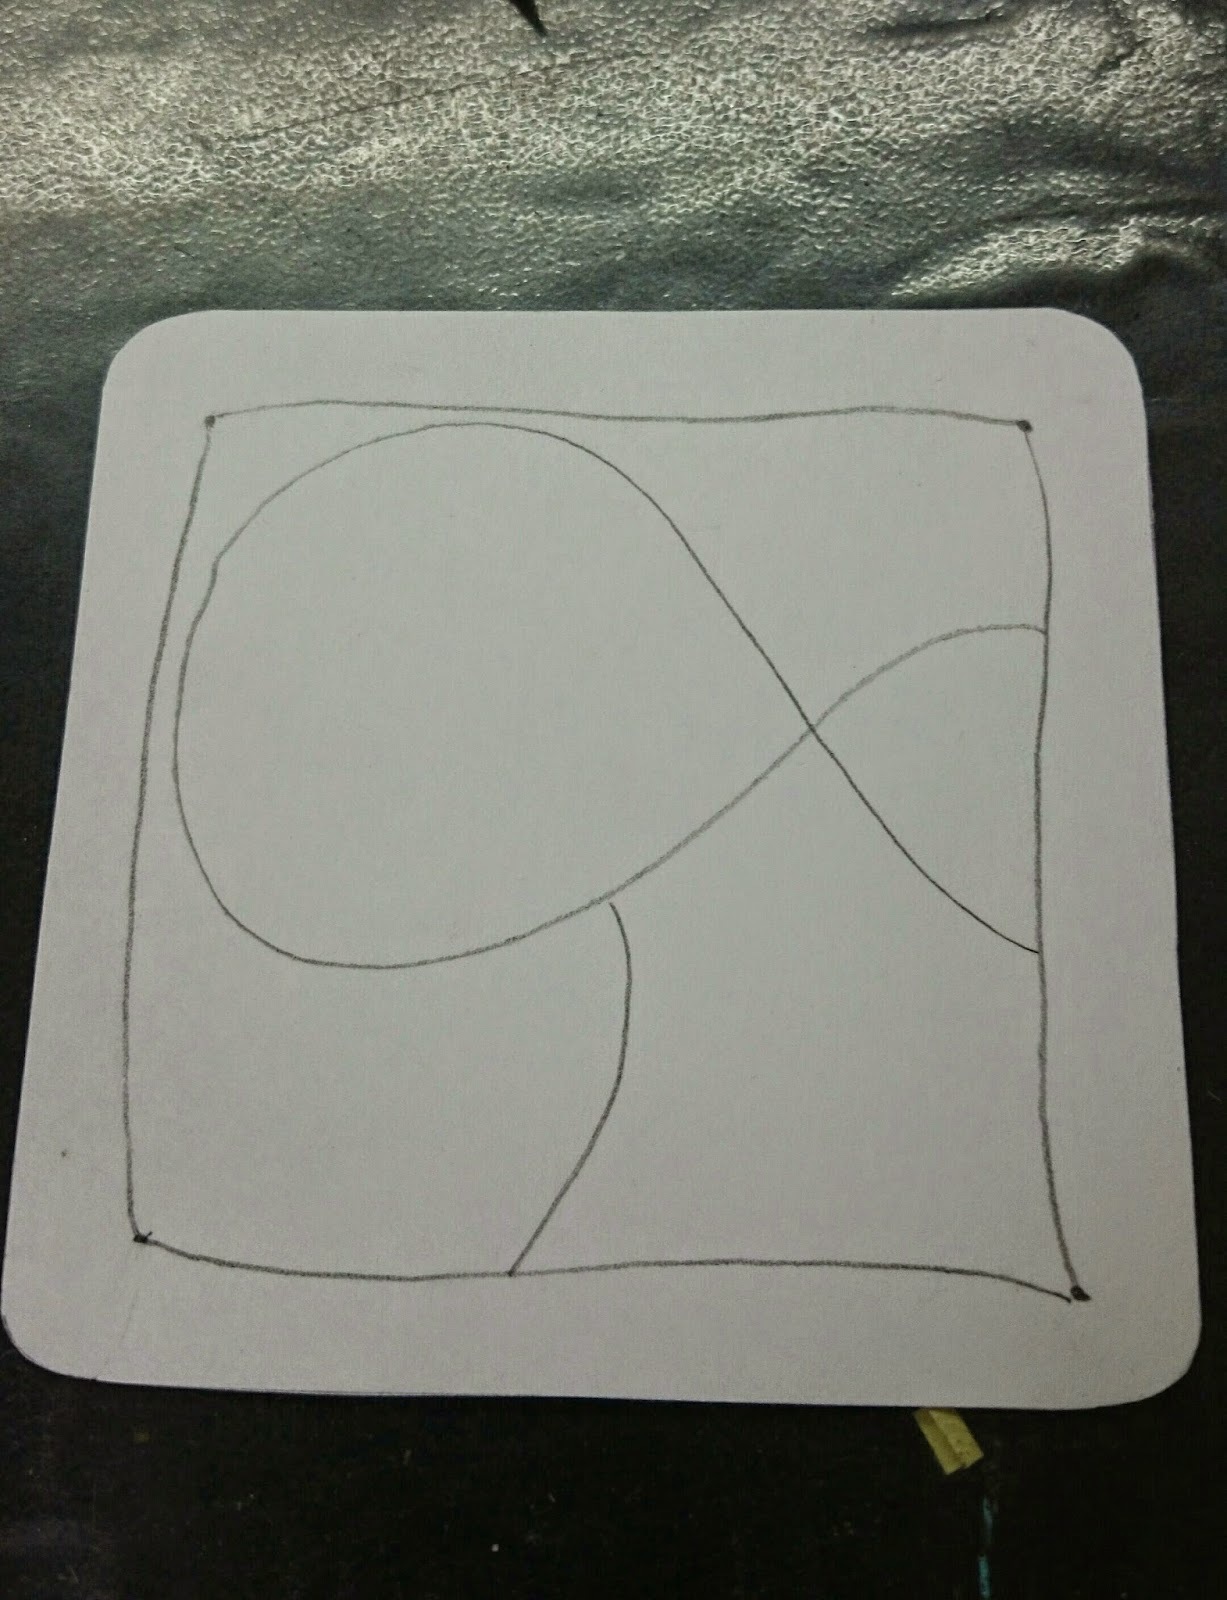 Then it will be necessary to draw a curve line with a pencil, which will divide the section of the sheet inside the border, it will decide how many types of pattern and tangles you can draw inside